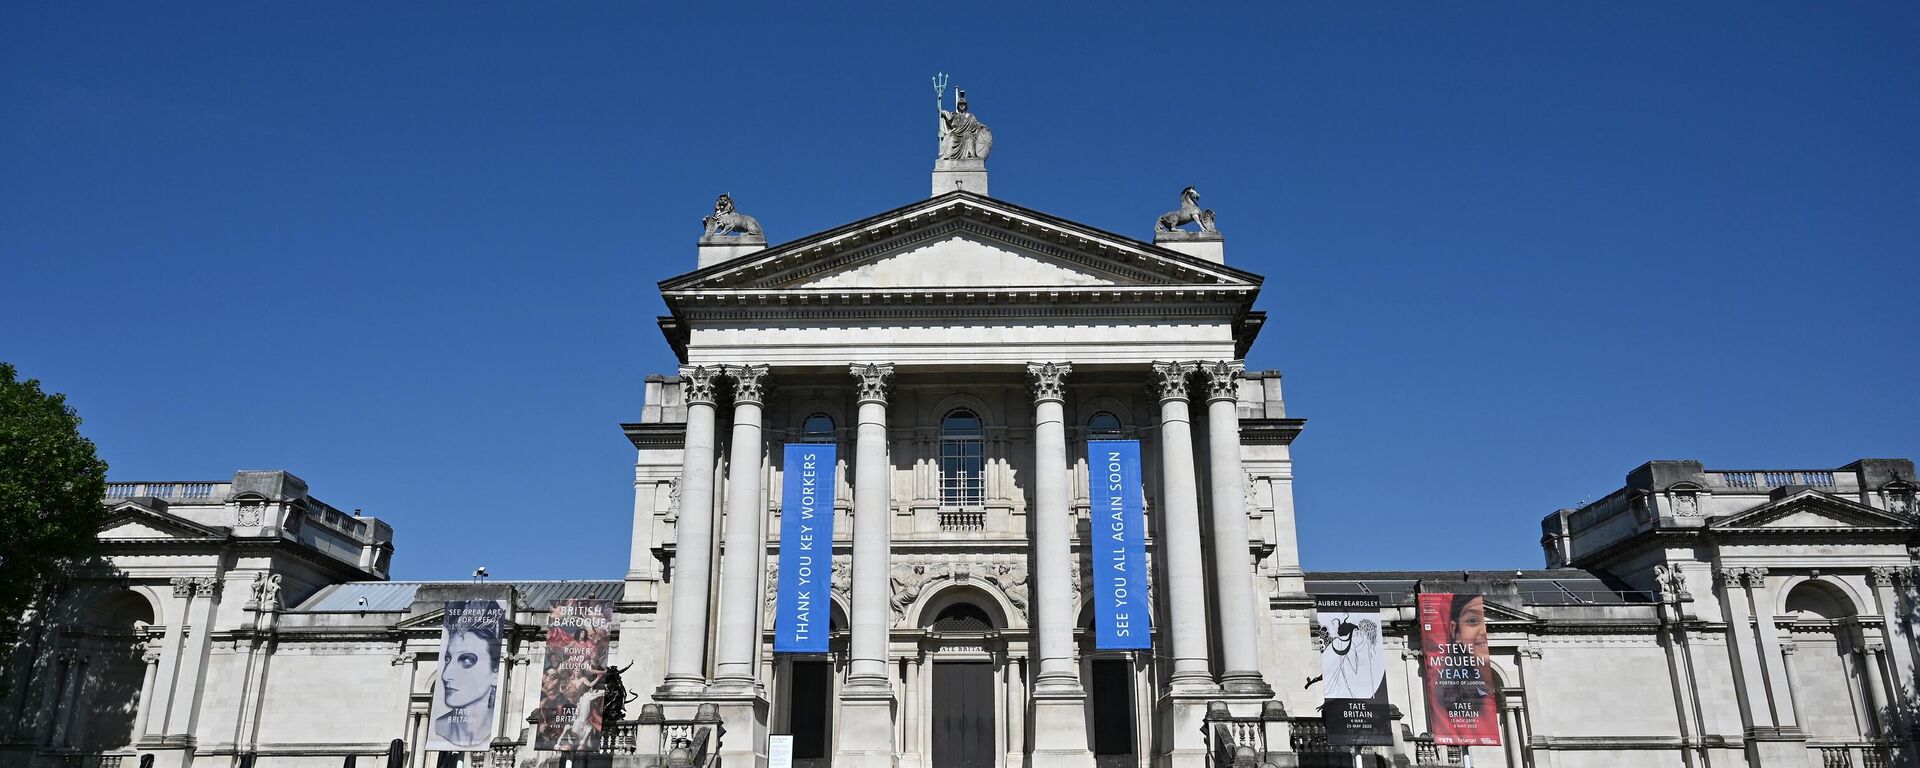 The Tate Britain museum, currently closed to visitors due to the ongoing COVID-19 pandemic, is pictured in central London on June 23, 2020. - Sputnik International, 1920, 14.03.2022